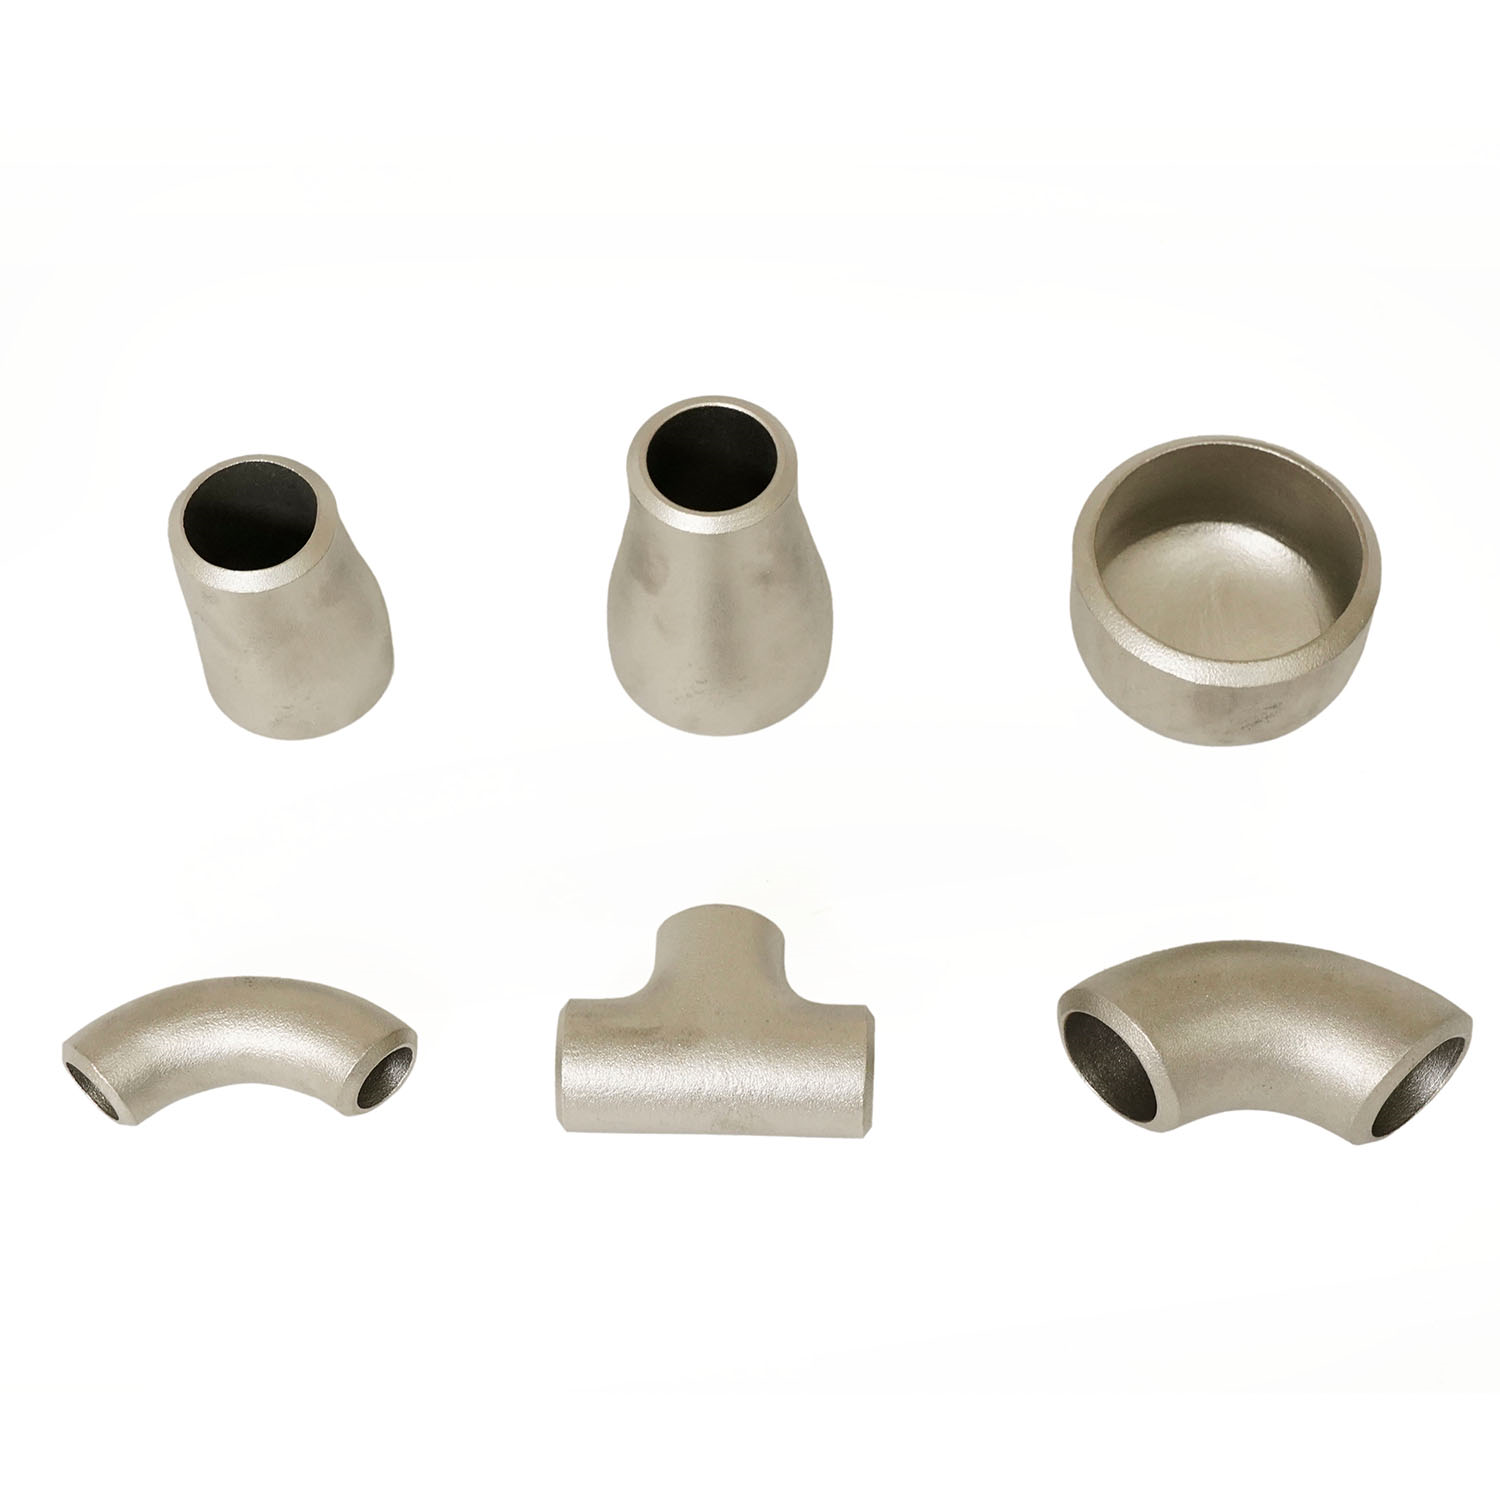 What is the principle of pickling pipe fittings?